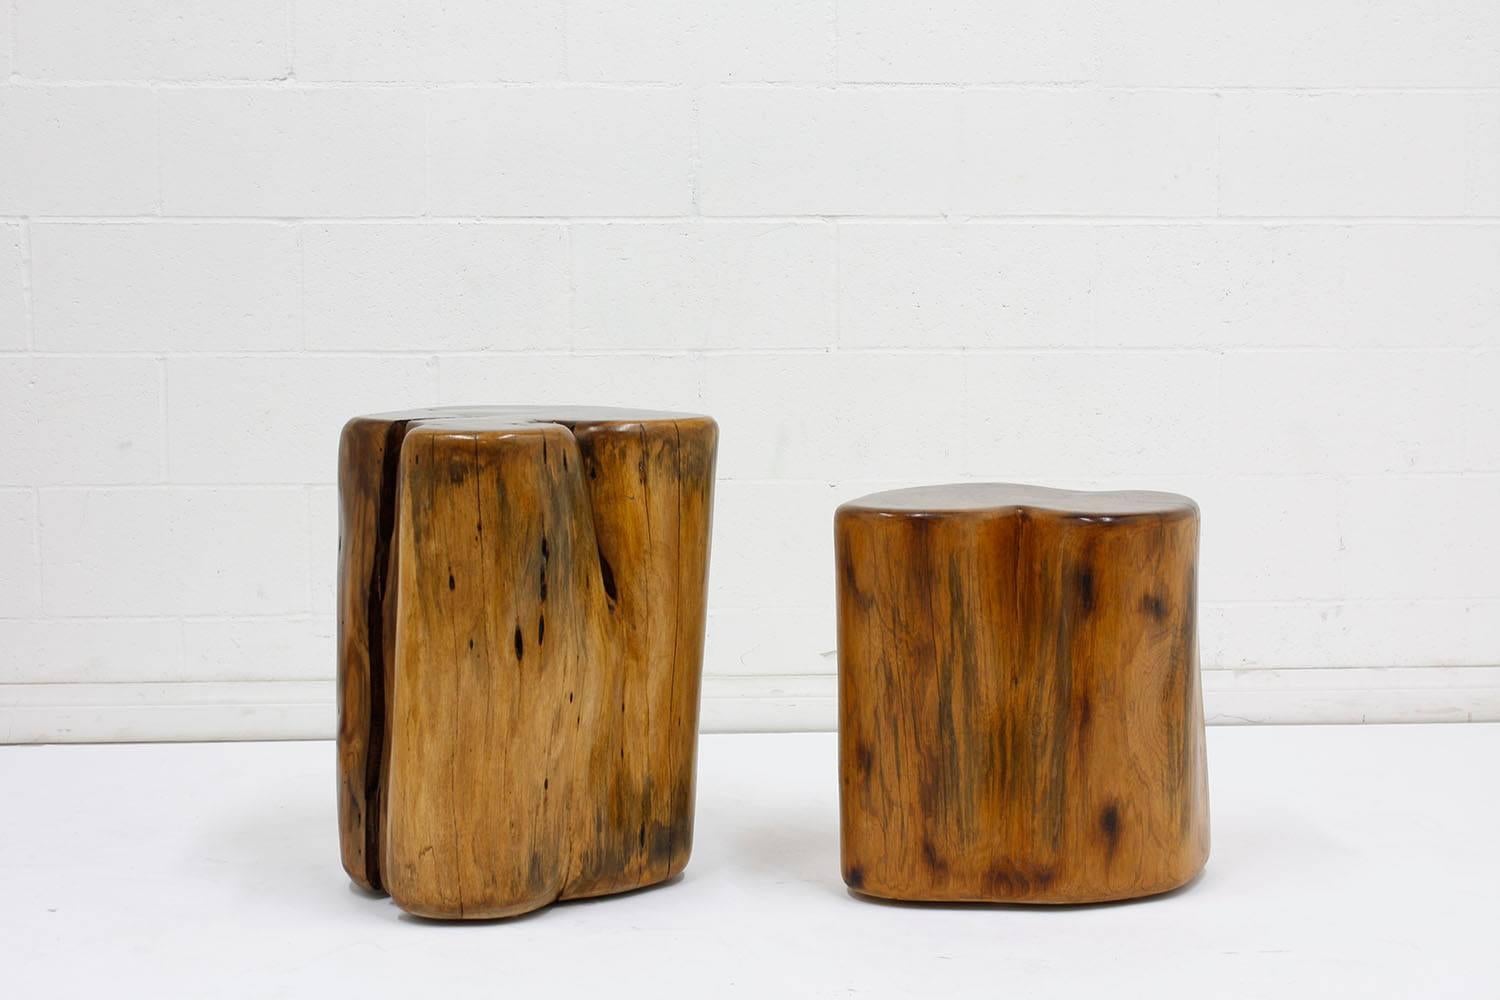 This pair of 1930s organic modern-style side tables or stools are made from walnut wood stumps. The stumps are feature a natural stain with a polished finish. The organic shape of the stumps are unique and timeless. This pair of side table or stools